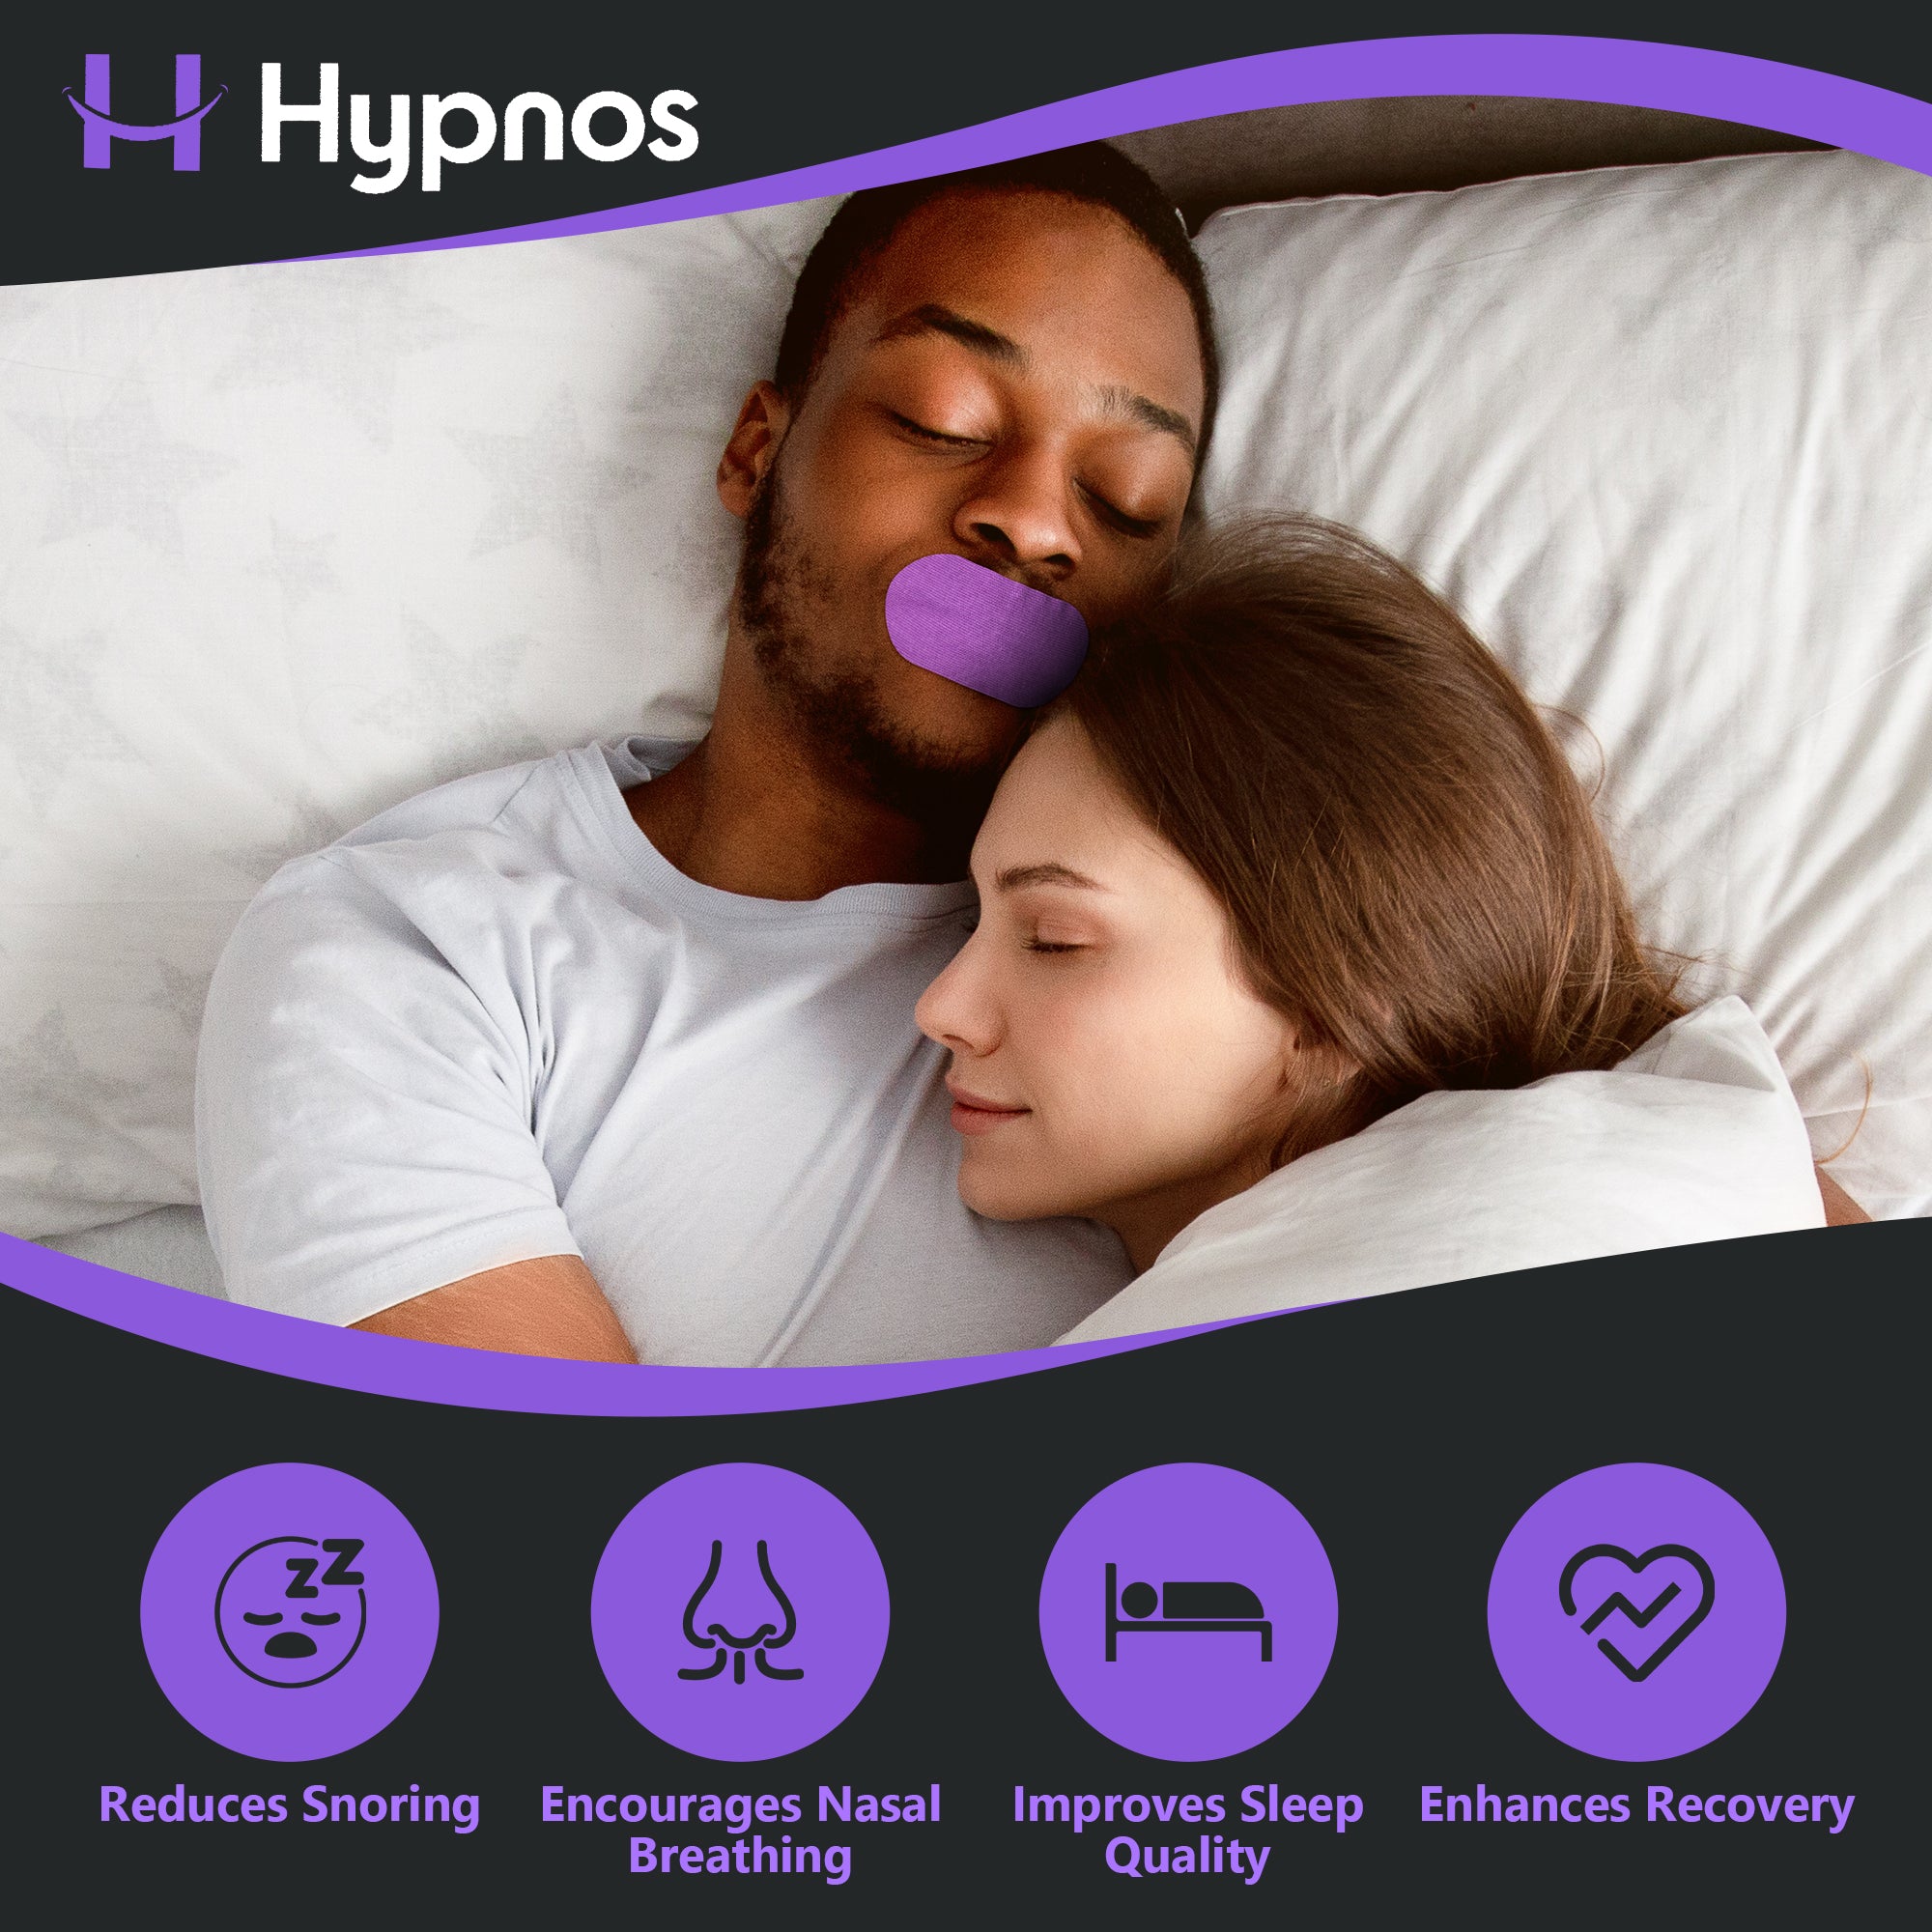 Hypnos Mouth Tape